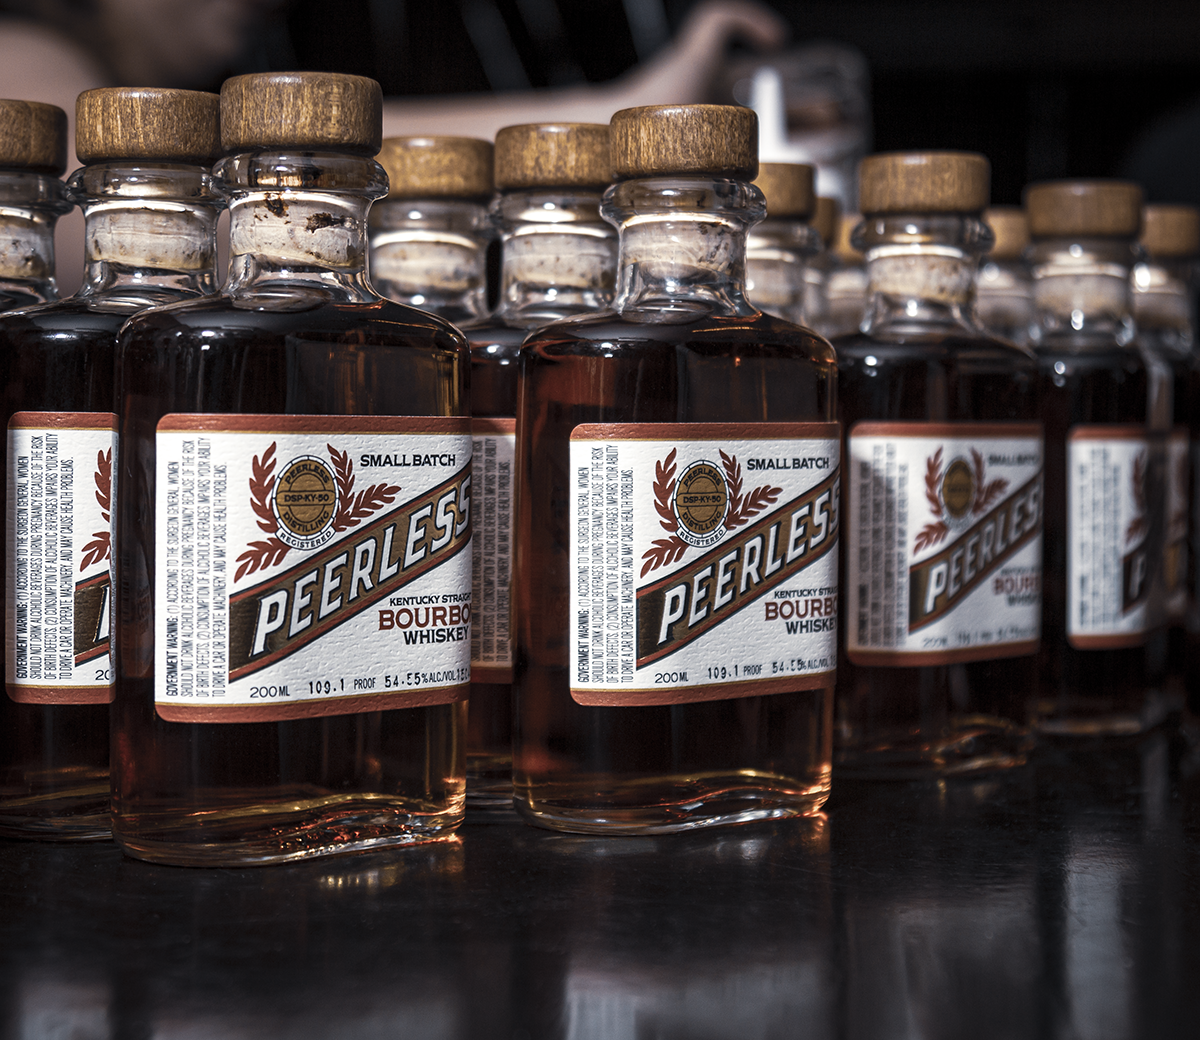 Kentucky Peerless Distillery held a party in New York City Tuesday night to introduce its first Bourbon in 102 years, and had bottles lined up at the bar. We'll have tasting notes for it on the next WhiskyCast!